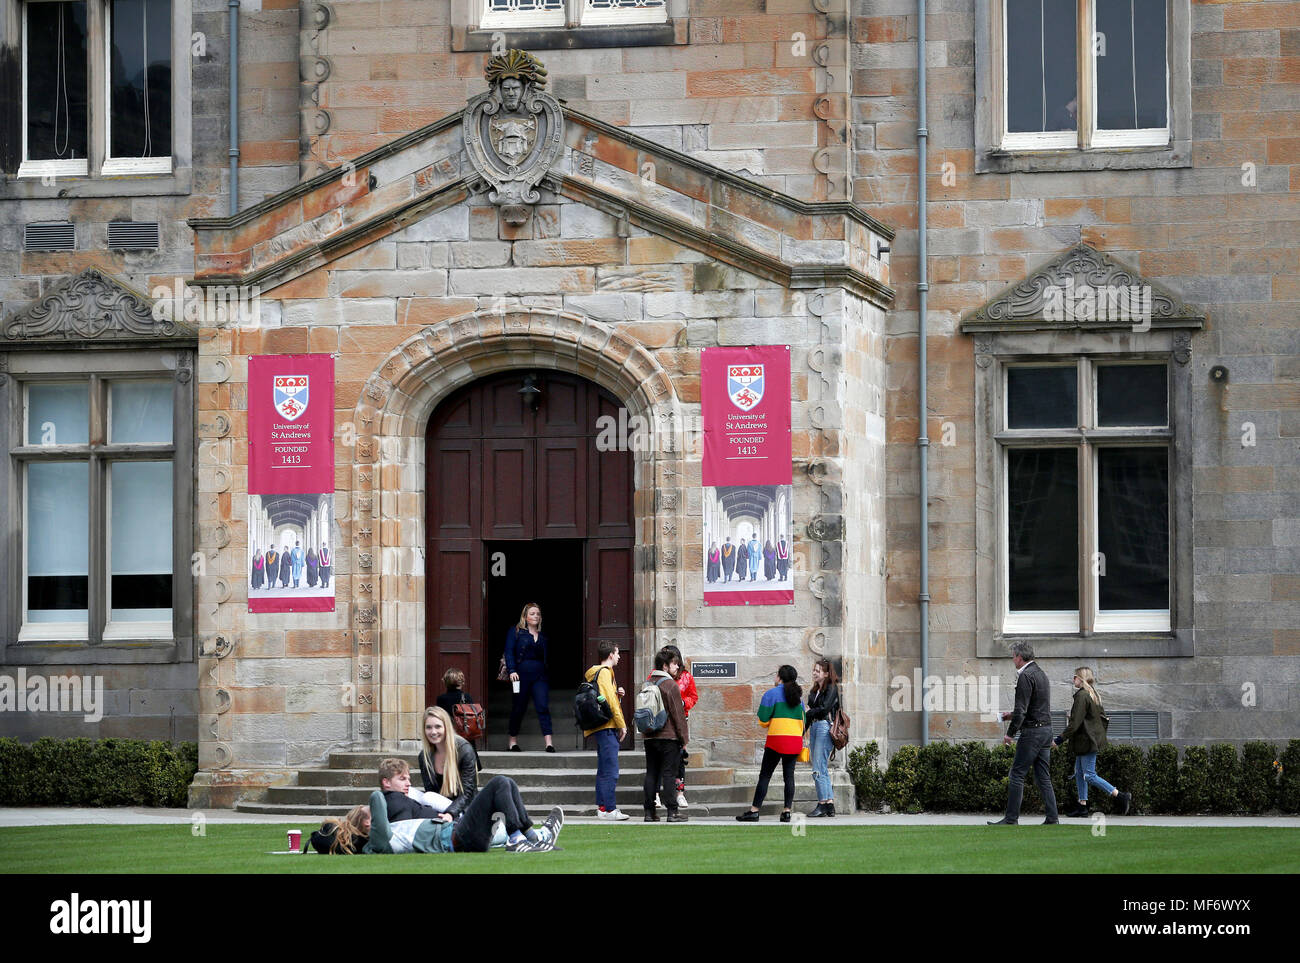 A general view of the Lower and Upper College Halls at the University of St Andrews. The University of St Andrews is top in Scotland and one of the five leading universities in the UK according to the new Complete University Guide's league table. Stock Photo